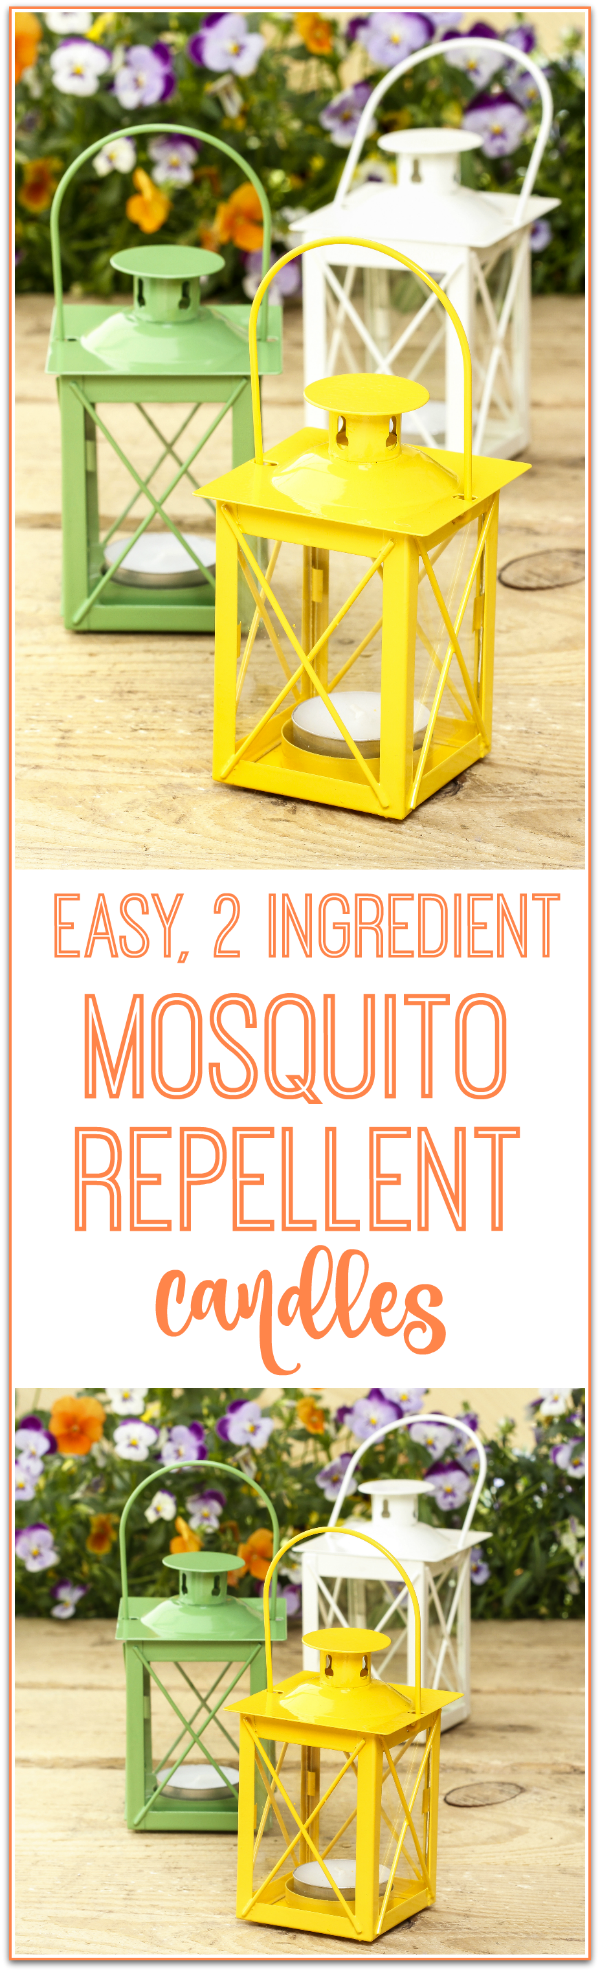 How to make easy mosquito repellent candles that repel mosquitoes, gnats and all other bugs - this is so simple and doable and all natural!!!